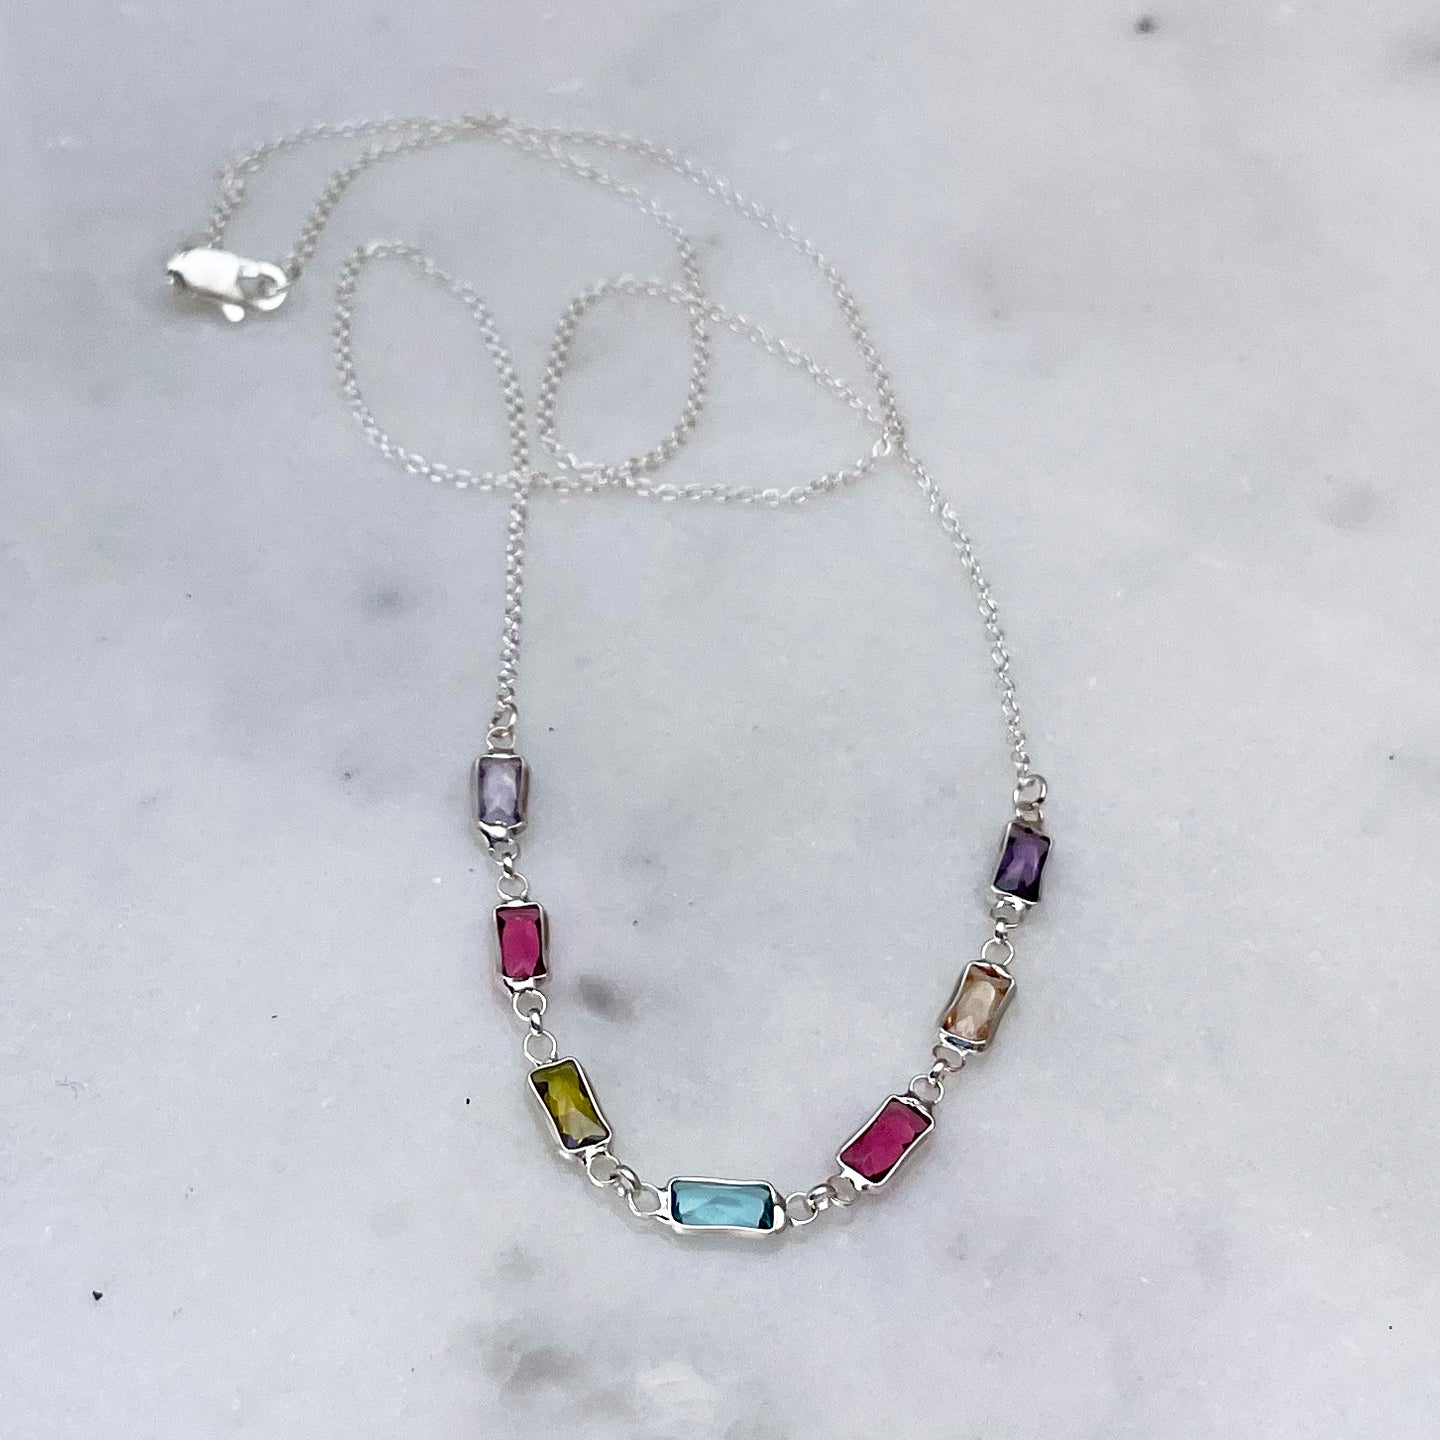 Stained Glass Necklace